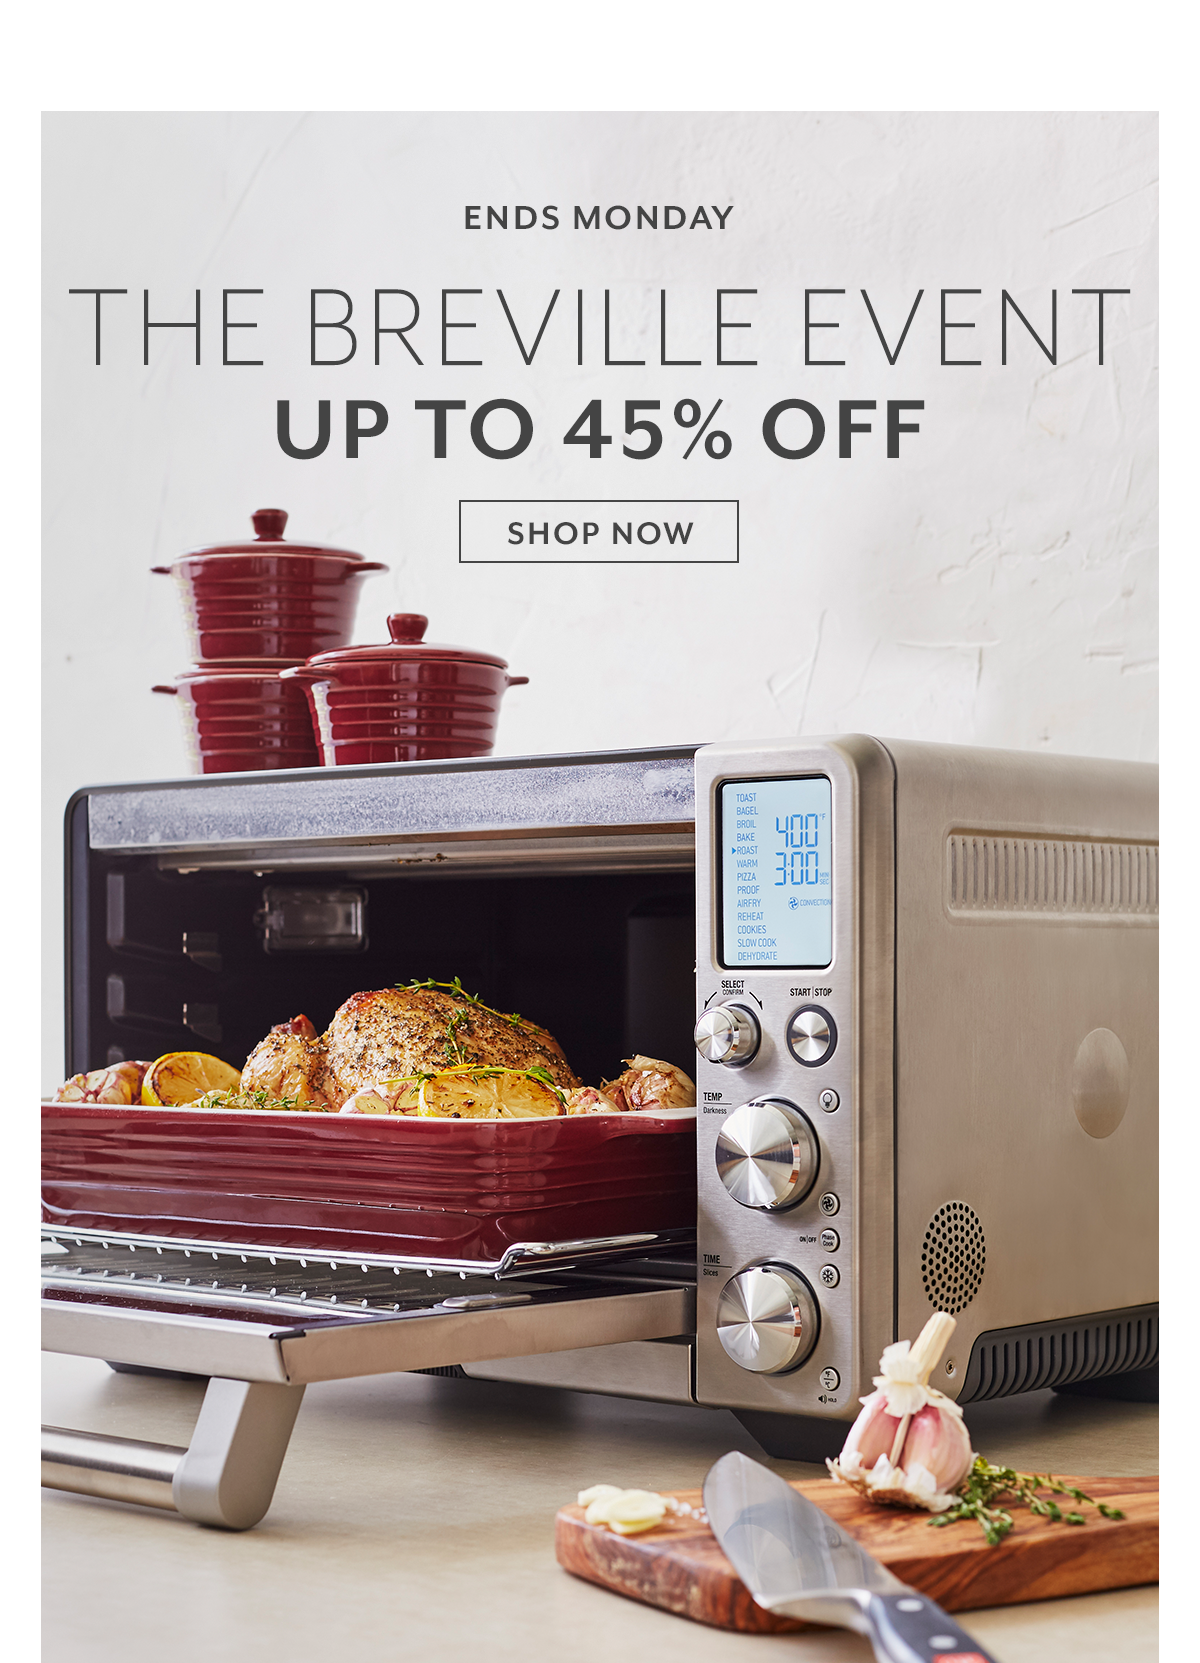 The Breville Event